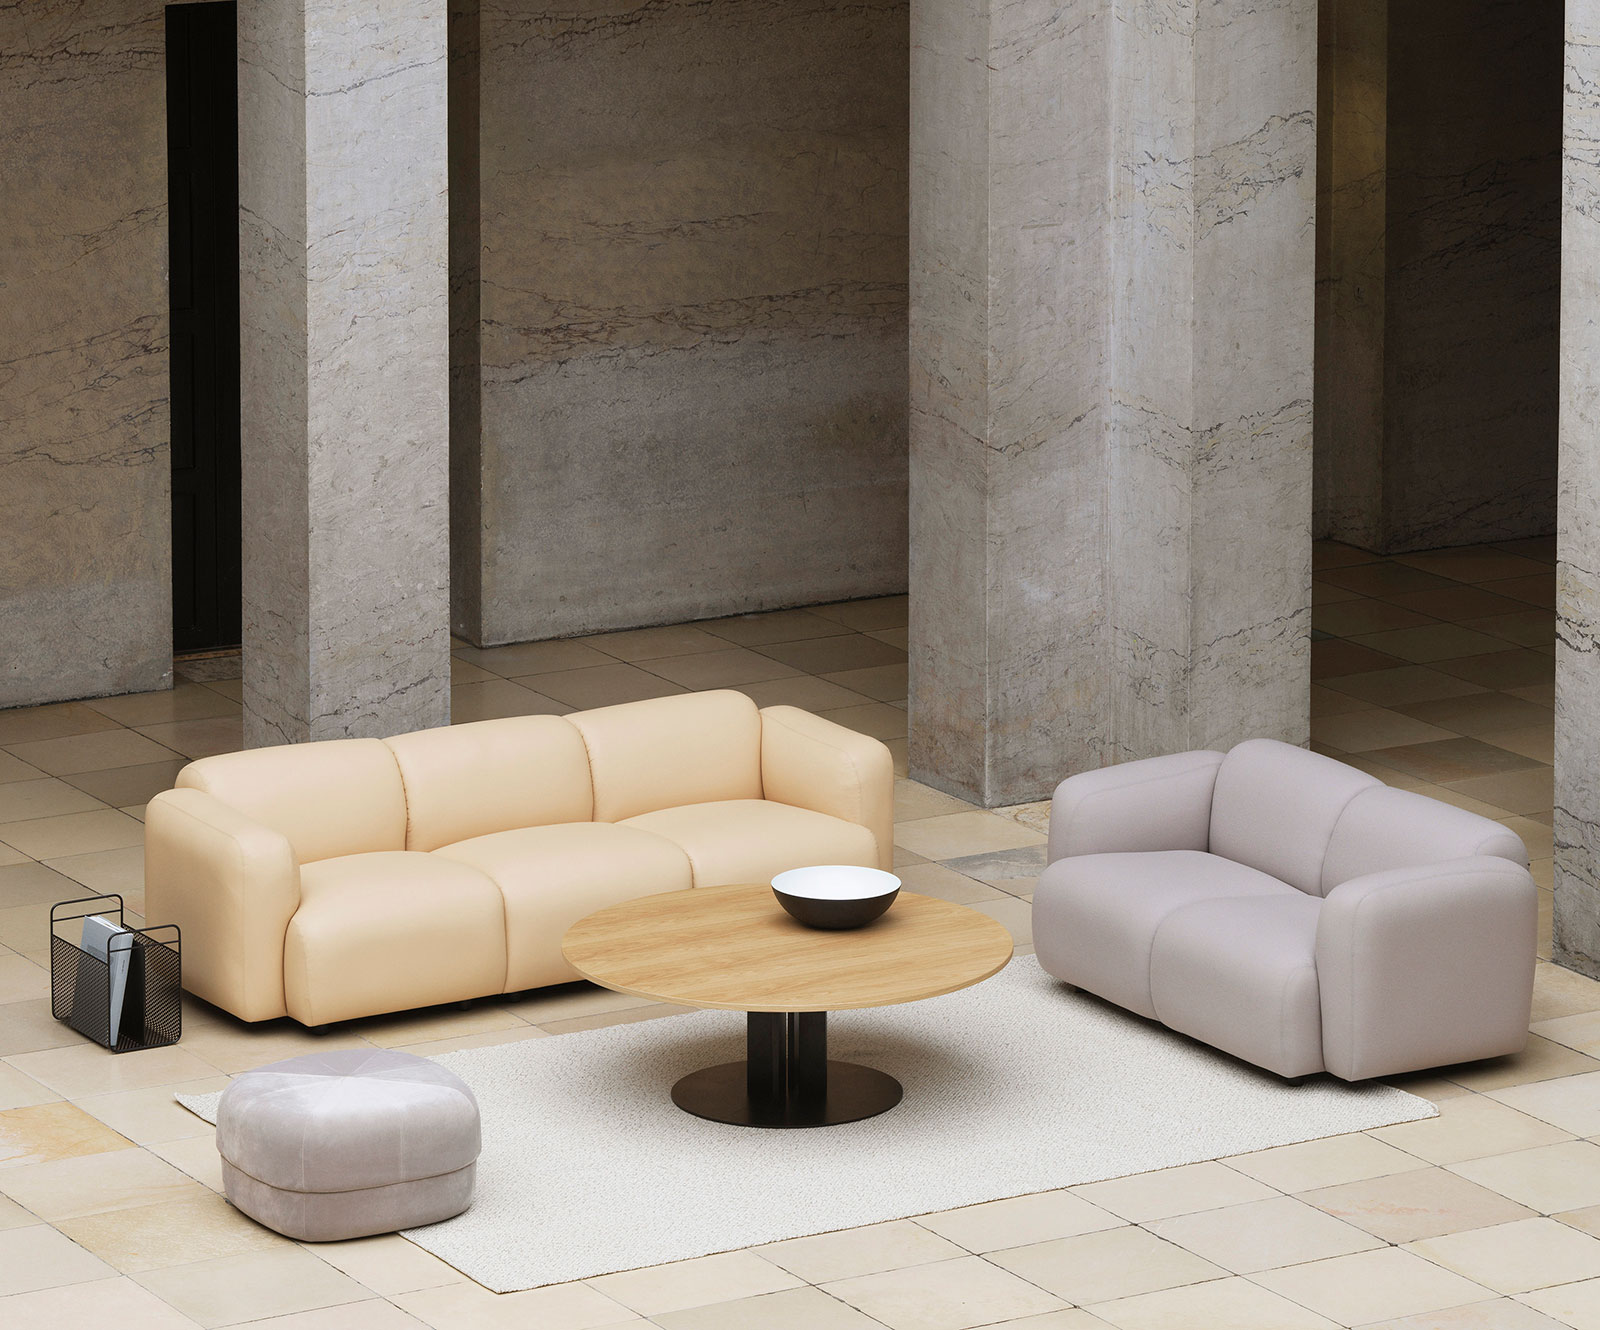 Swell sofas in a lounge setting